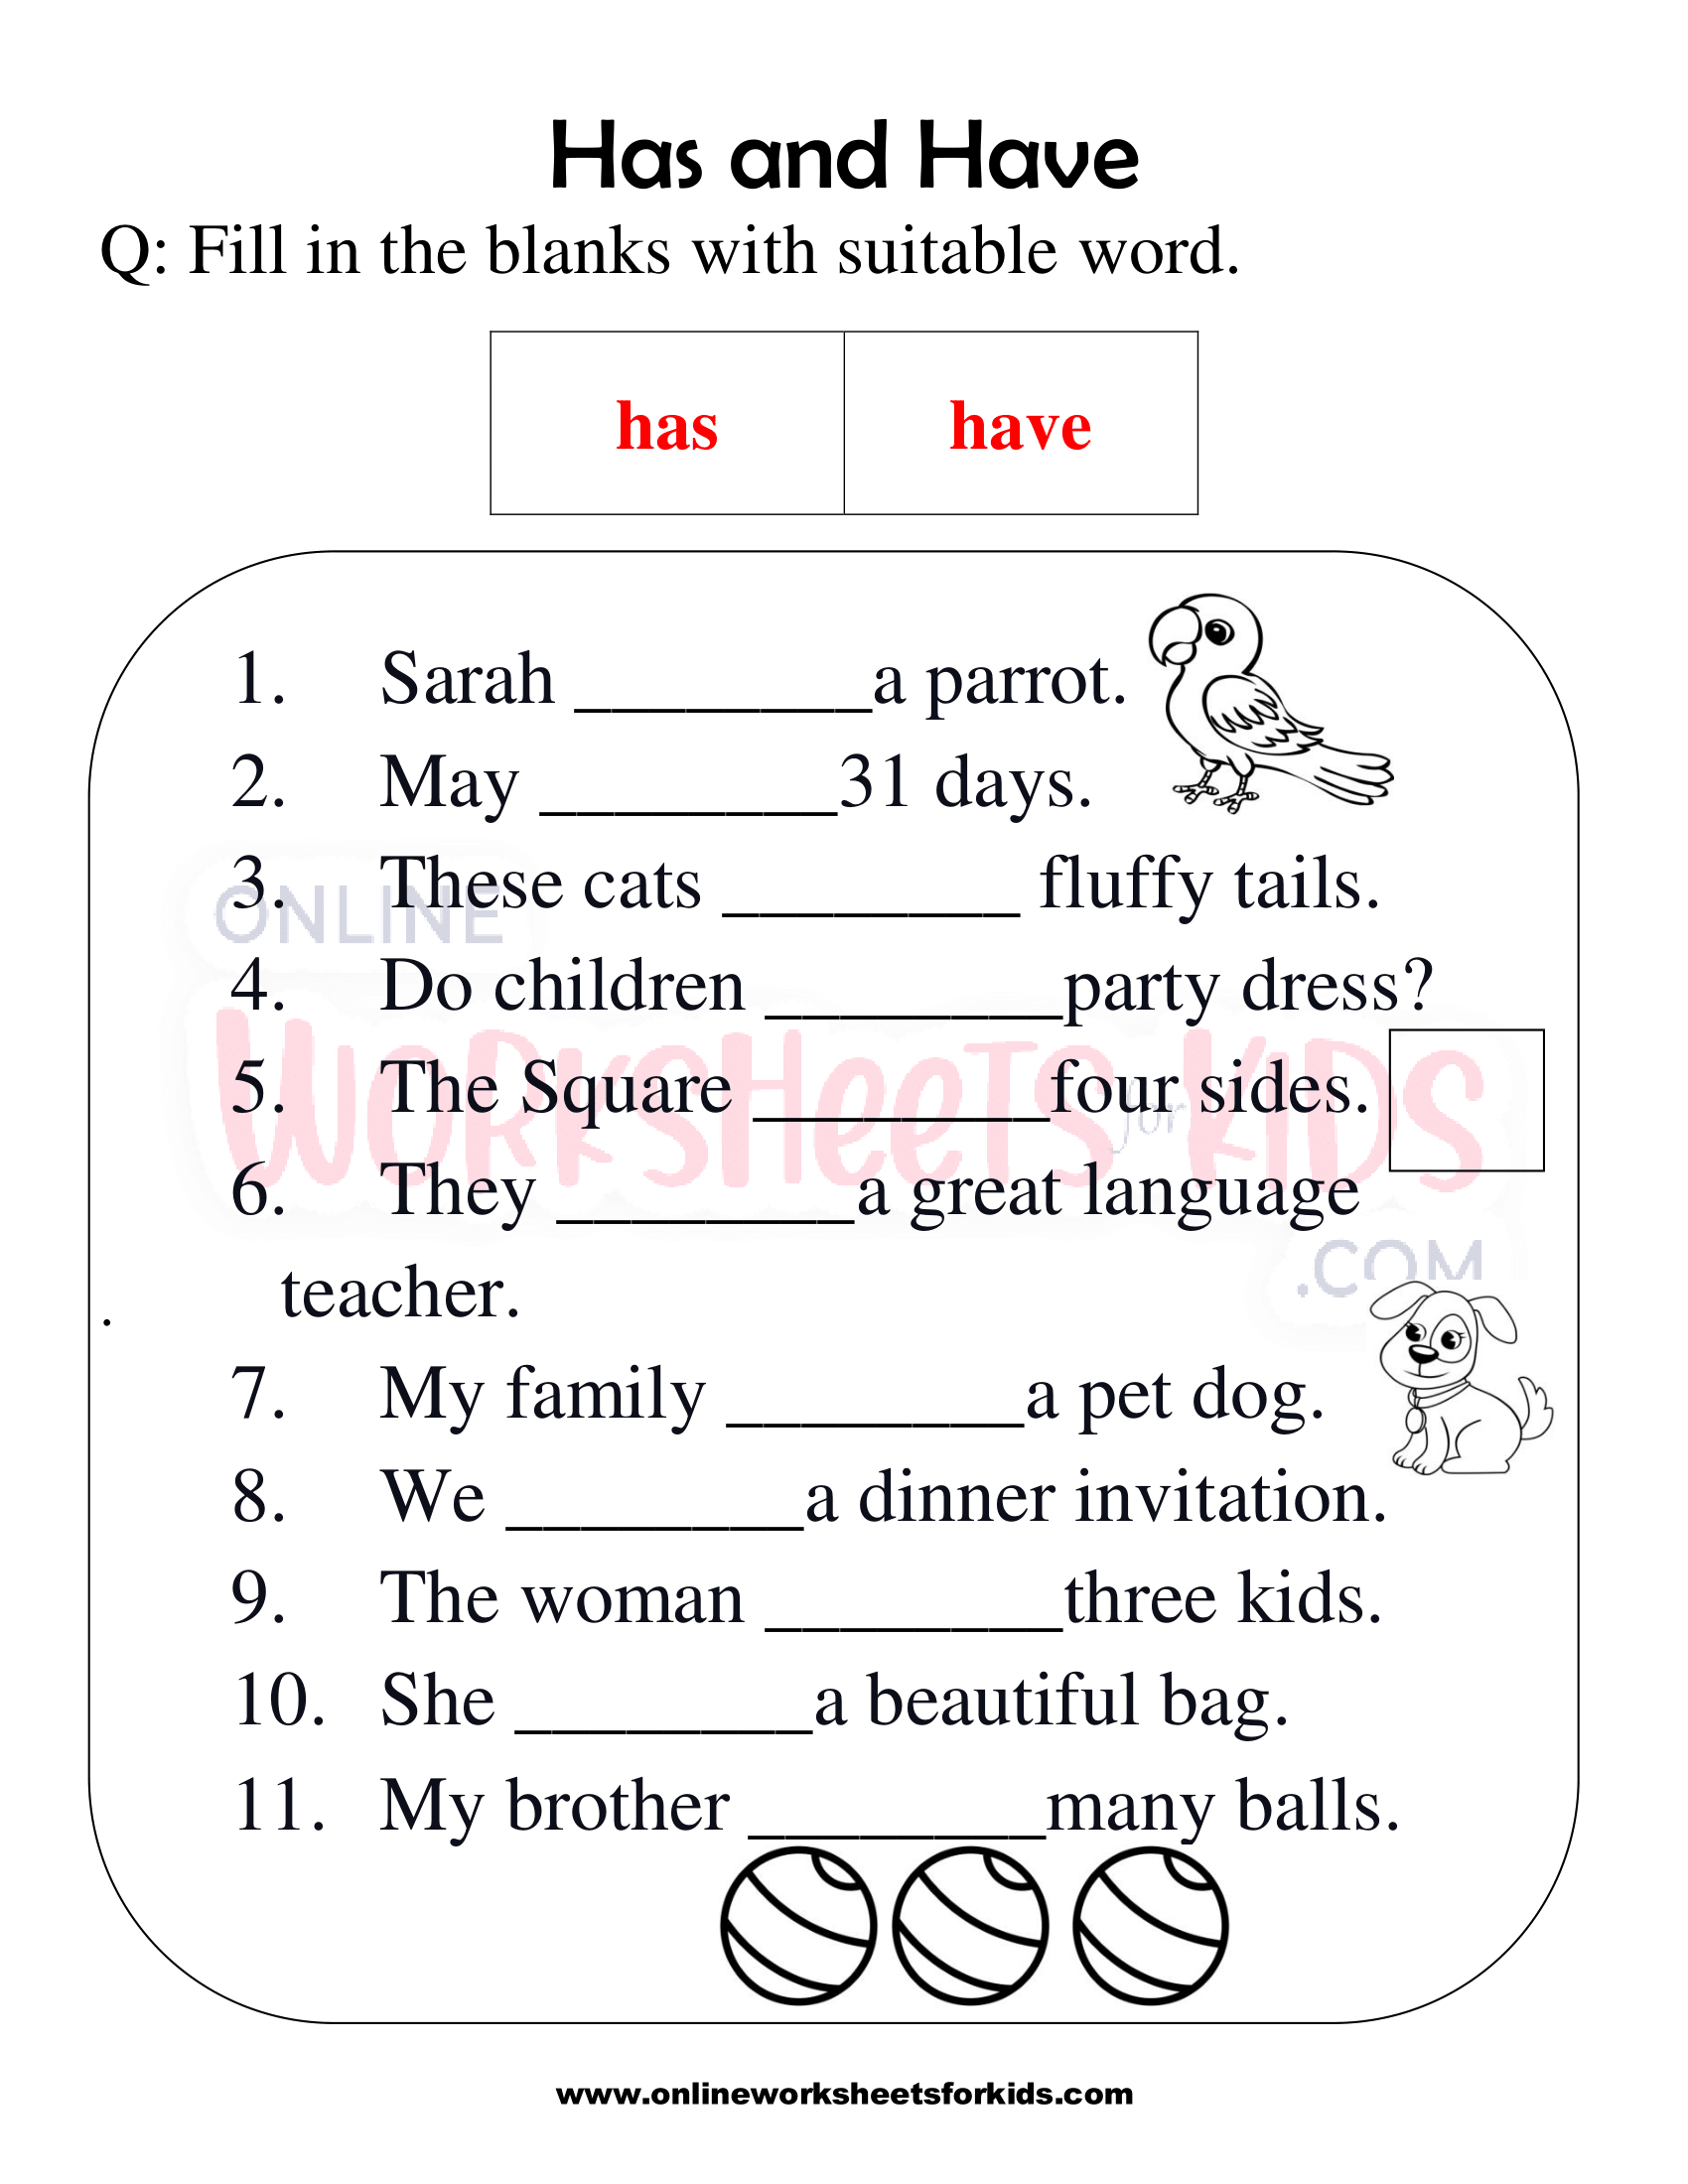 has-and-have-worksheets-for-grade-1-5